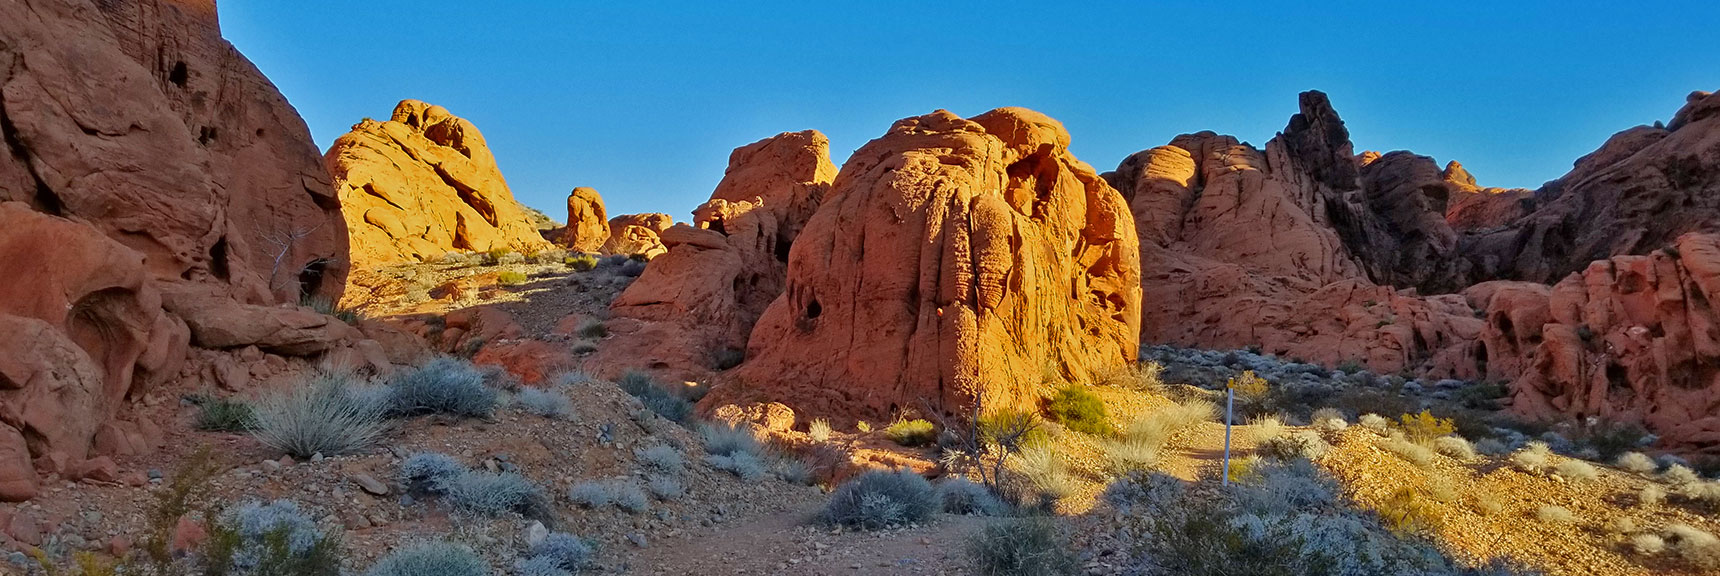 Moving Through the Upper Pass at Sunrise on Prospect Trail in Valley of Fire State Park, Nevada